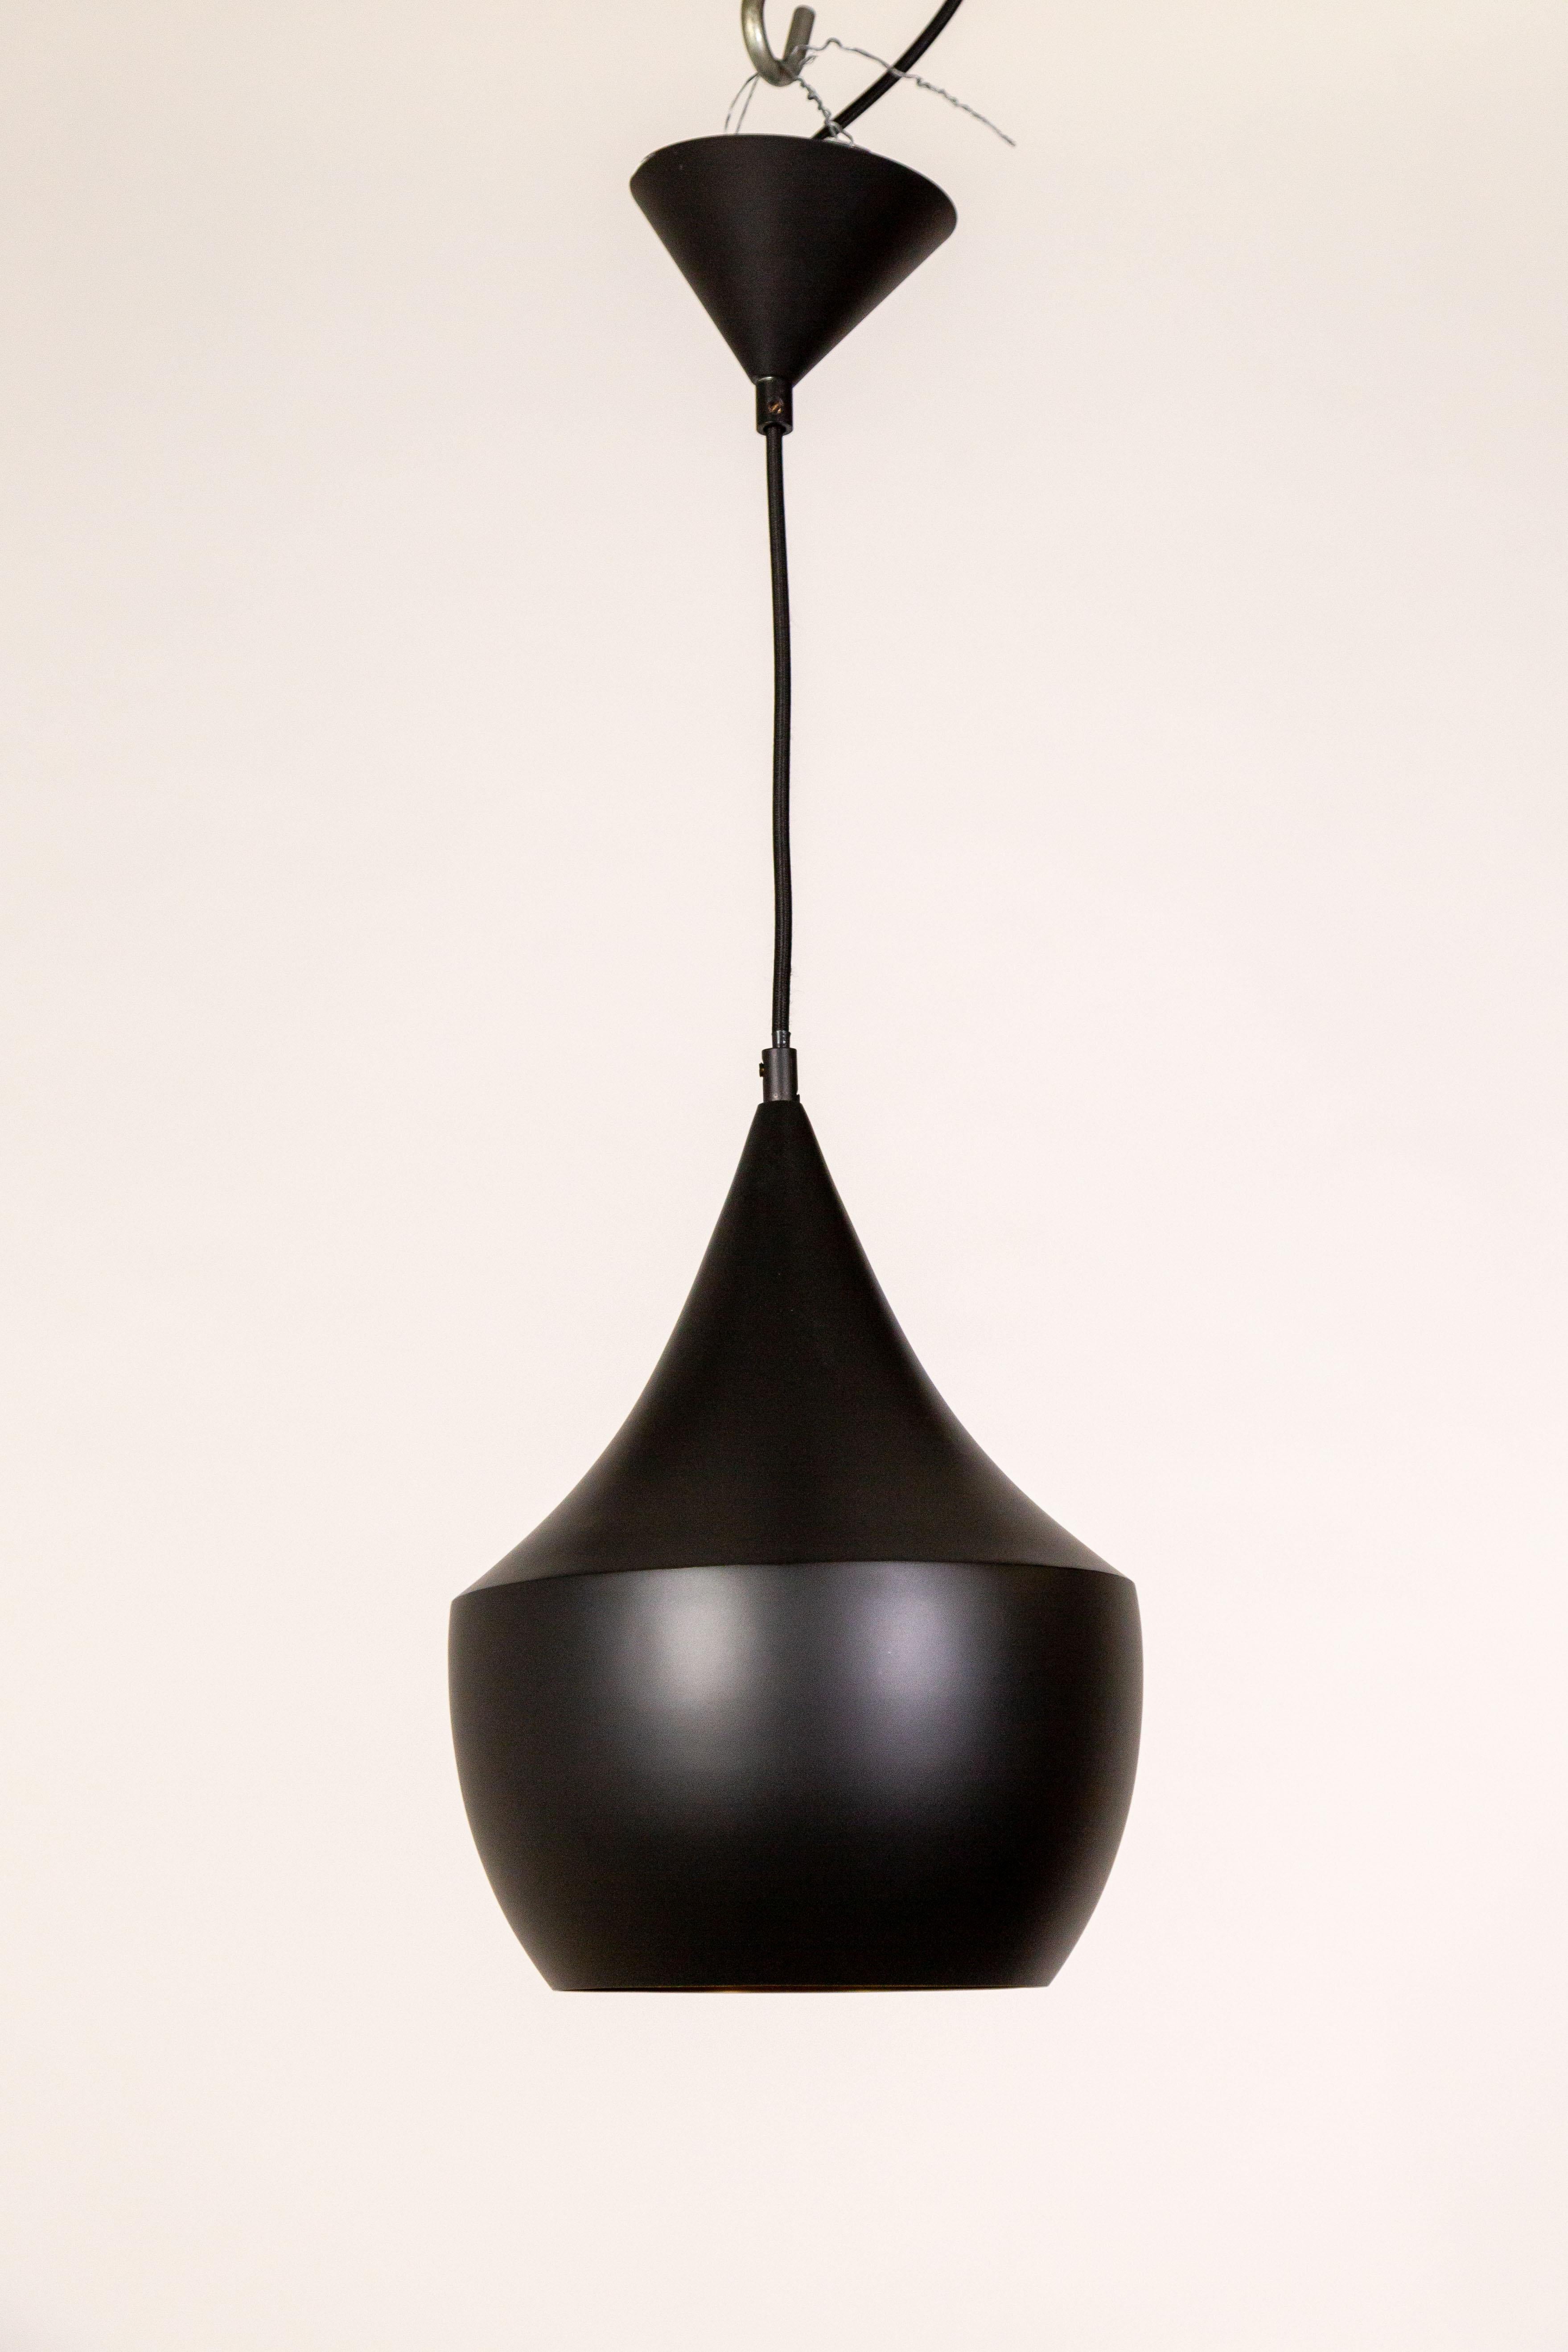 The contemporary Beat Fat pendant light, designed by Tom Dixon, is made of hand spun brass in India. It is satin matte black with a shiny, gold textured interior which refracts and reflects light. With an integrated LED module and black fabric